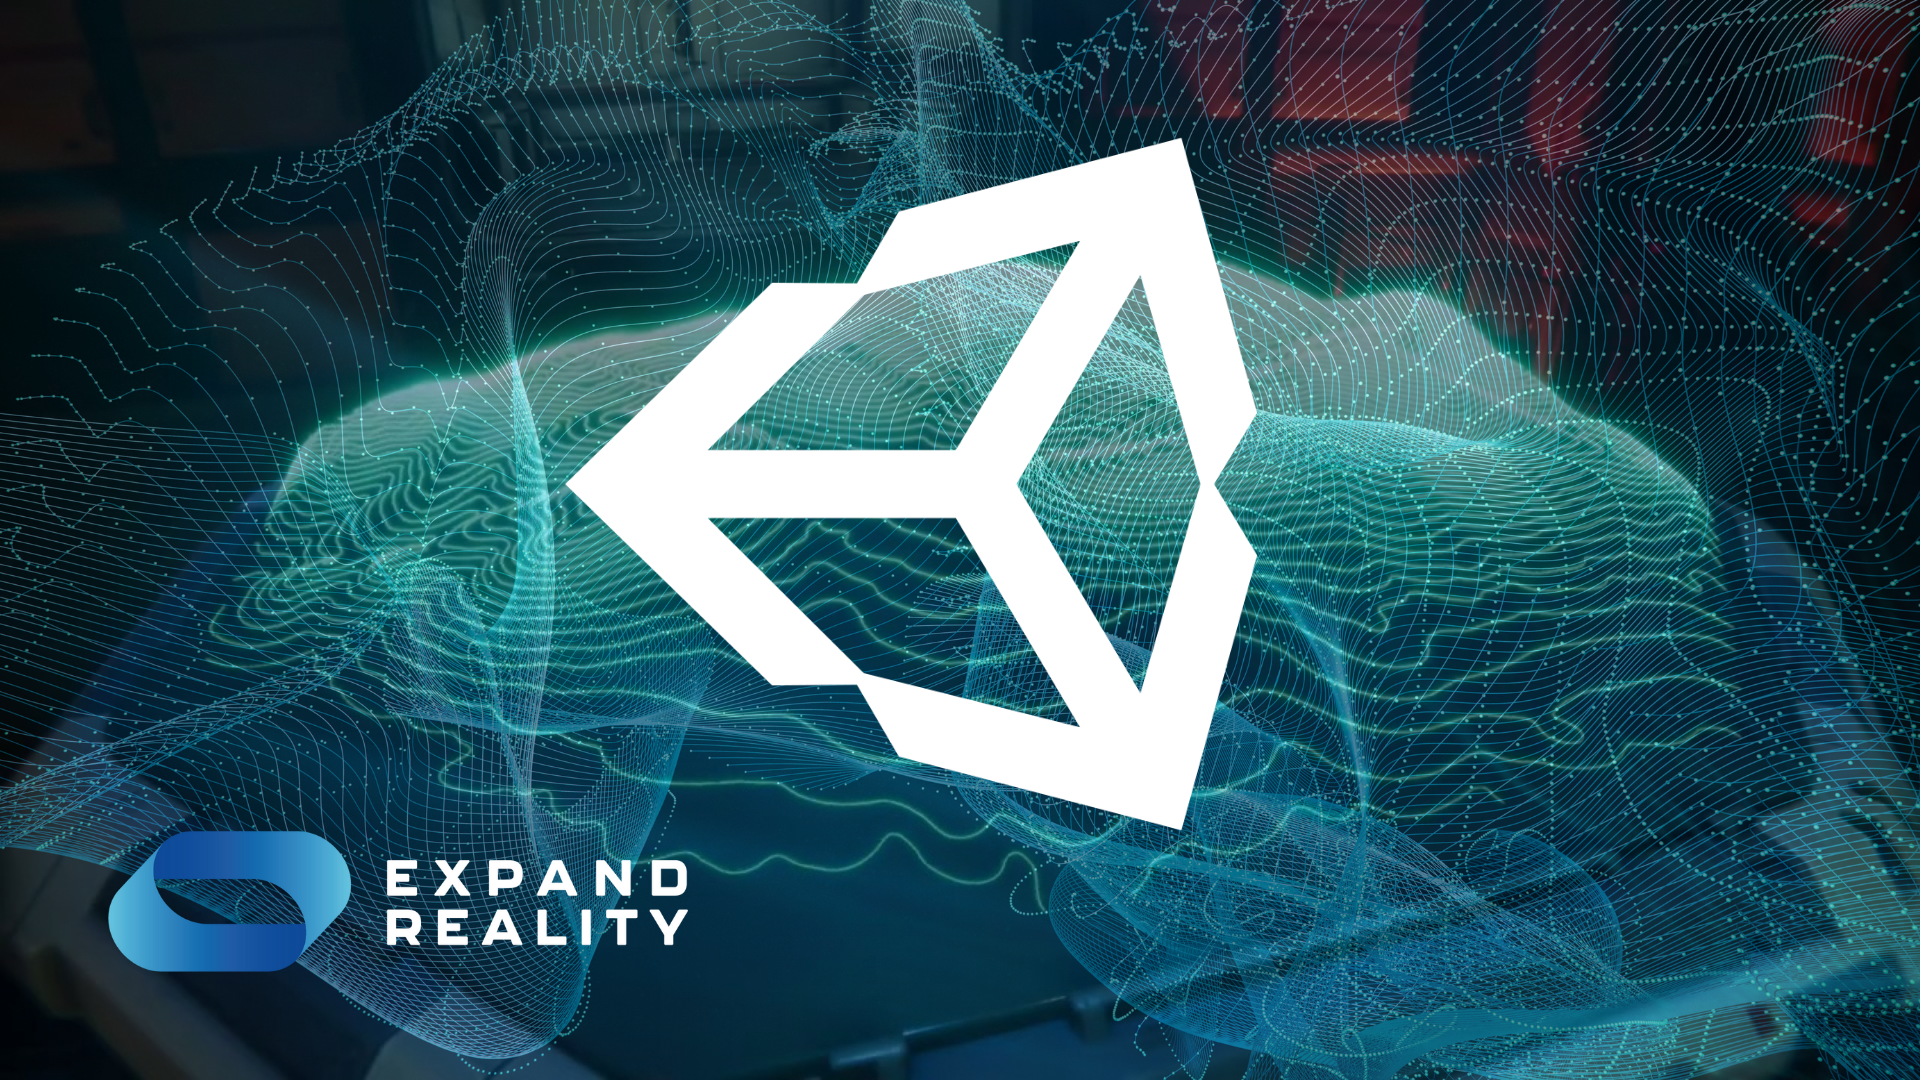 Unity is helping developers craft exciting (and useful!) augmented reality projects. Here are 4 impressive AR apps developed using the popular engine.